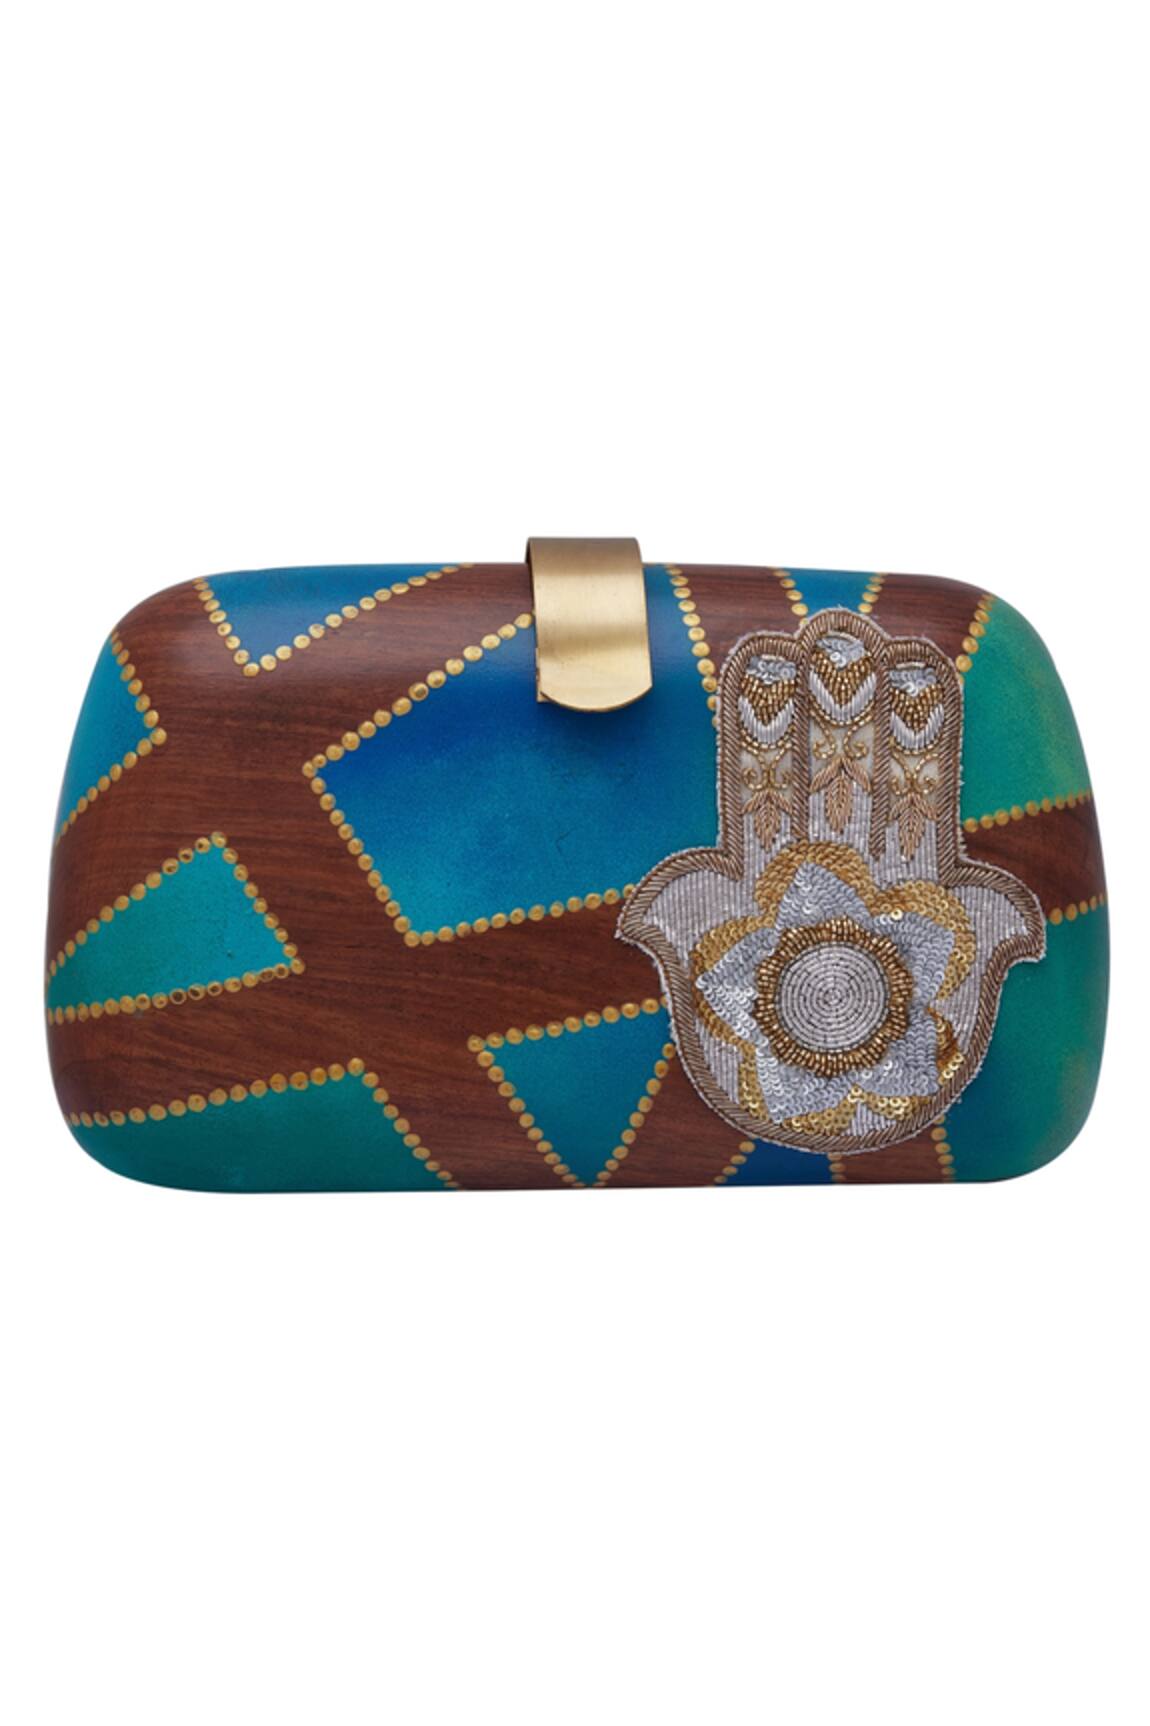 Crazy Palette Clutch with hand embroidered motif